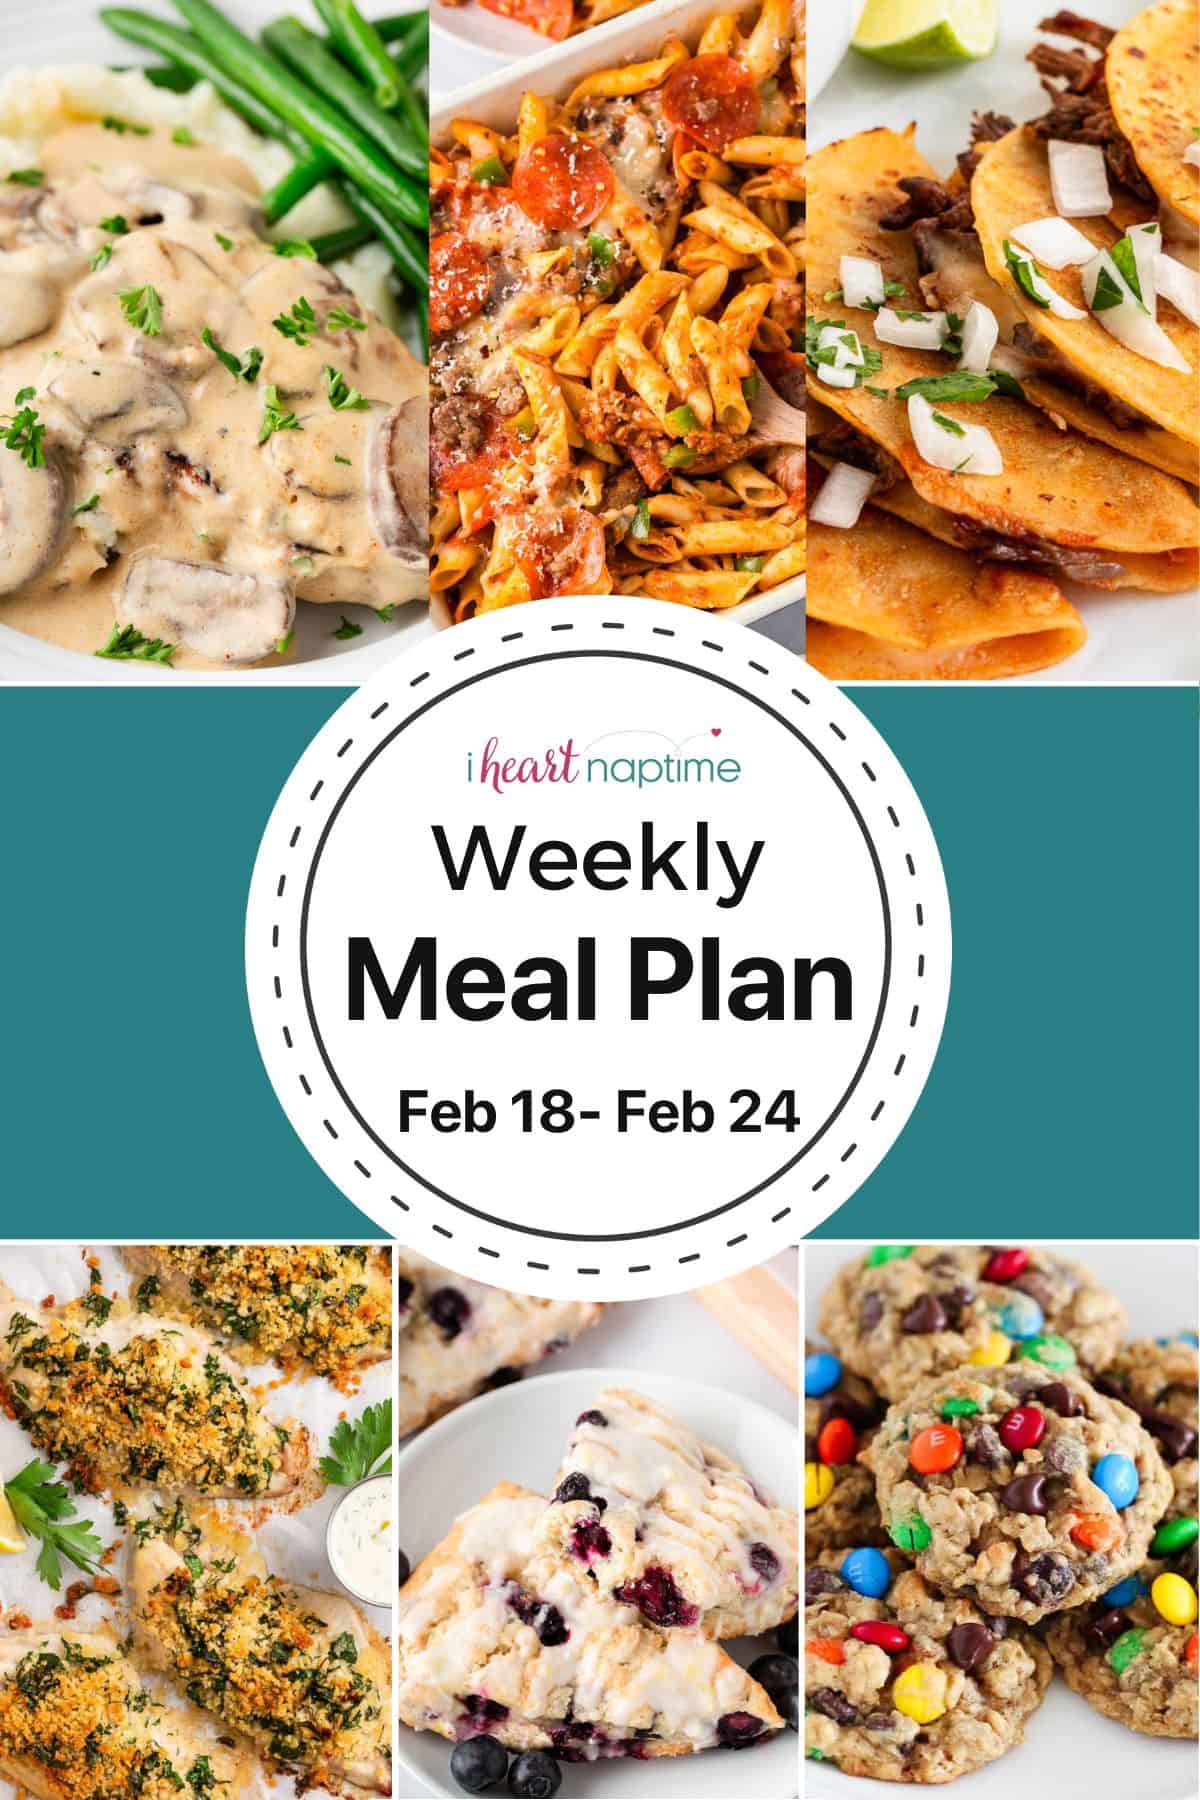 Meal plan recipes for I Heart Naptime.